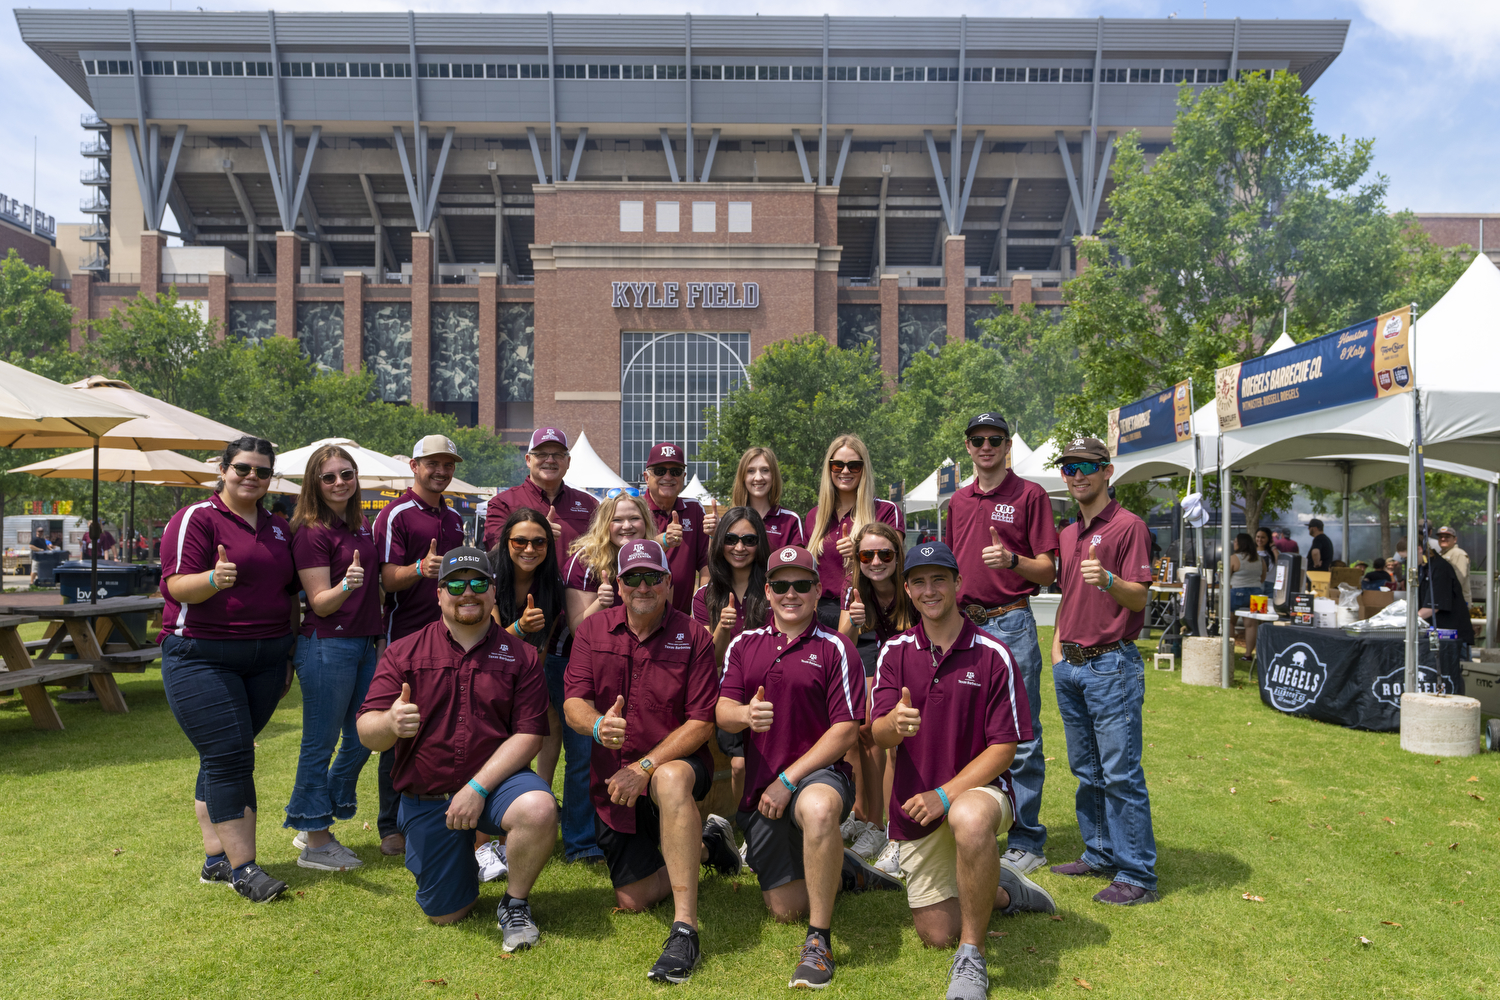 Texas A&M team members pose for a picture during the Troubadour Festival, which brought together barbecue and music while educating the public about meat science and food safety.